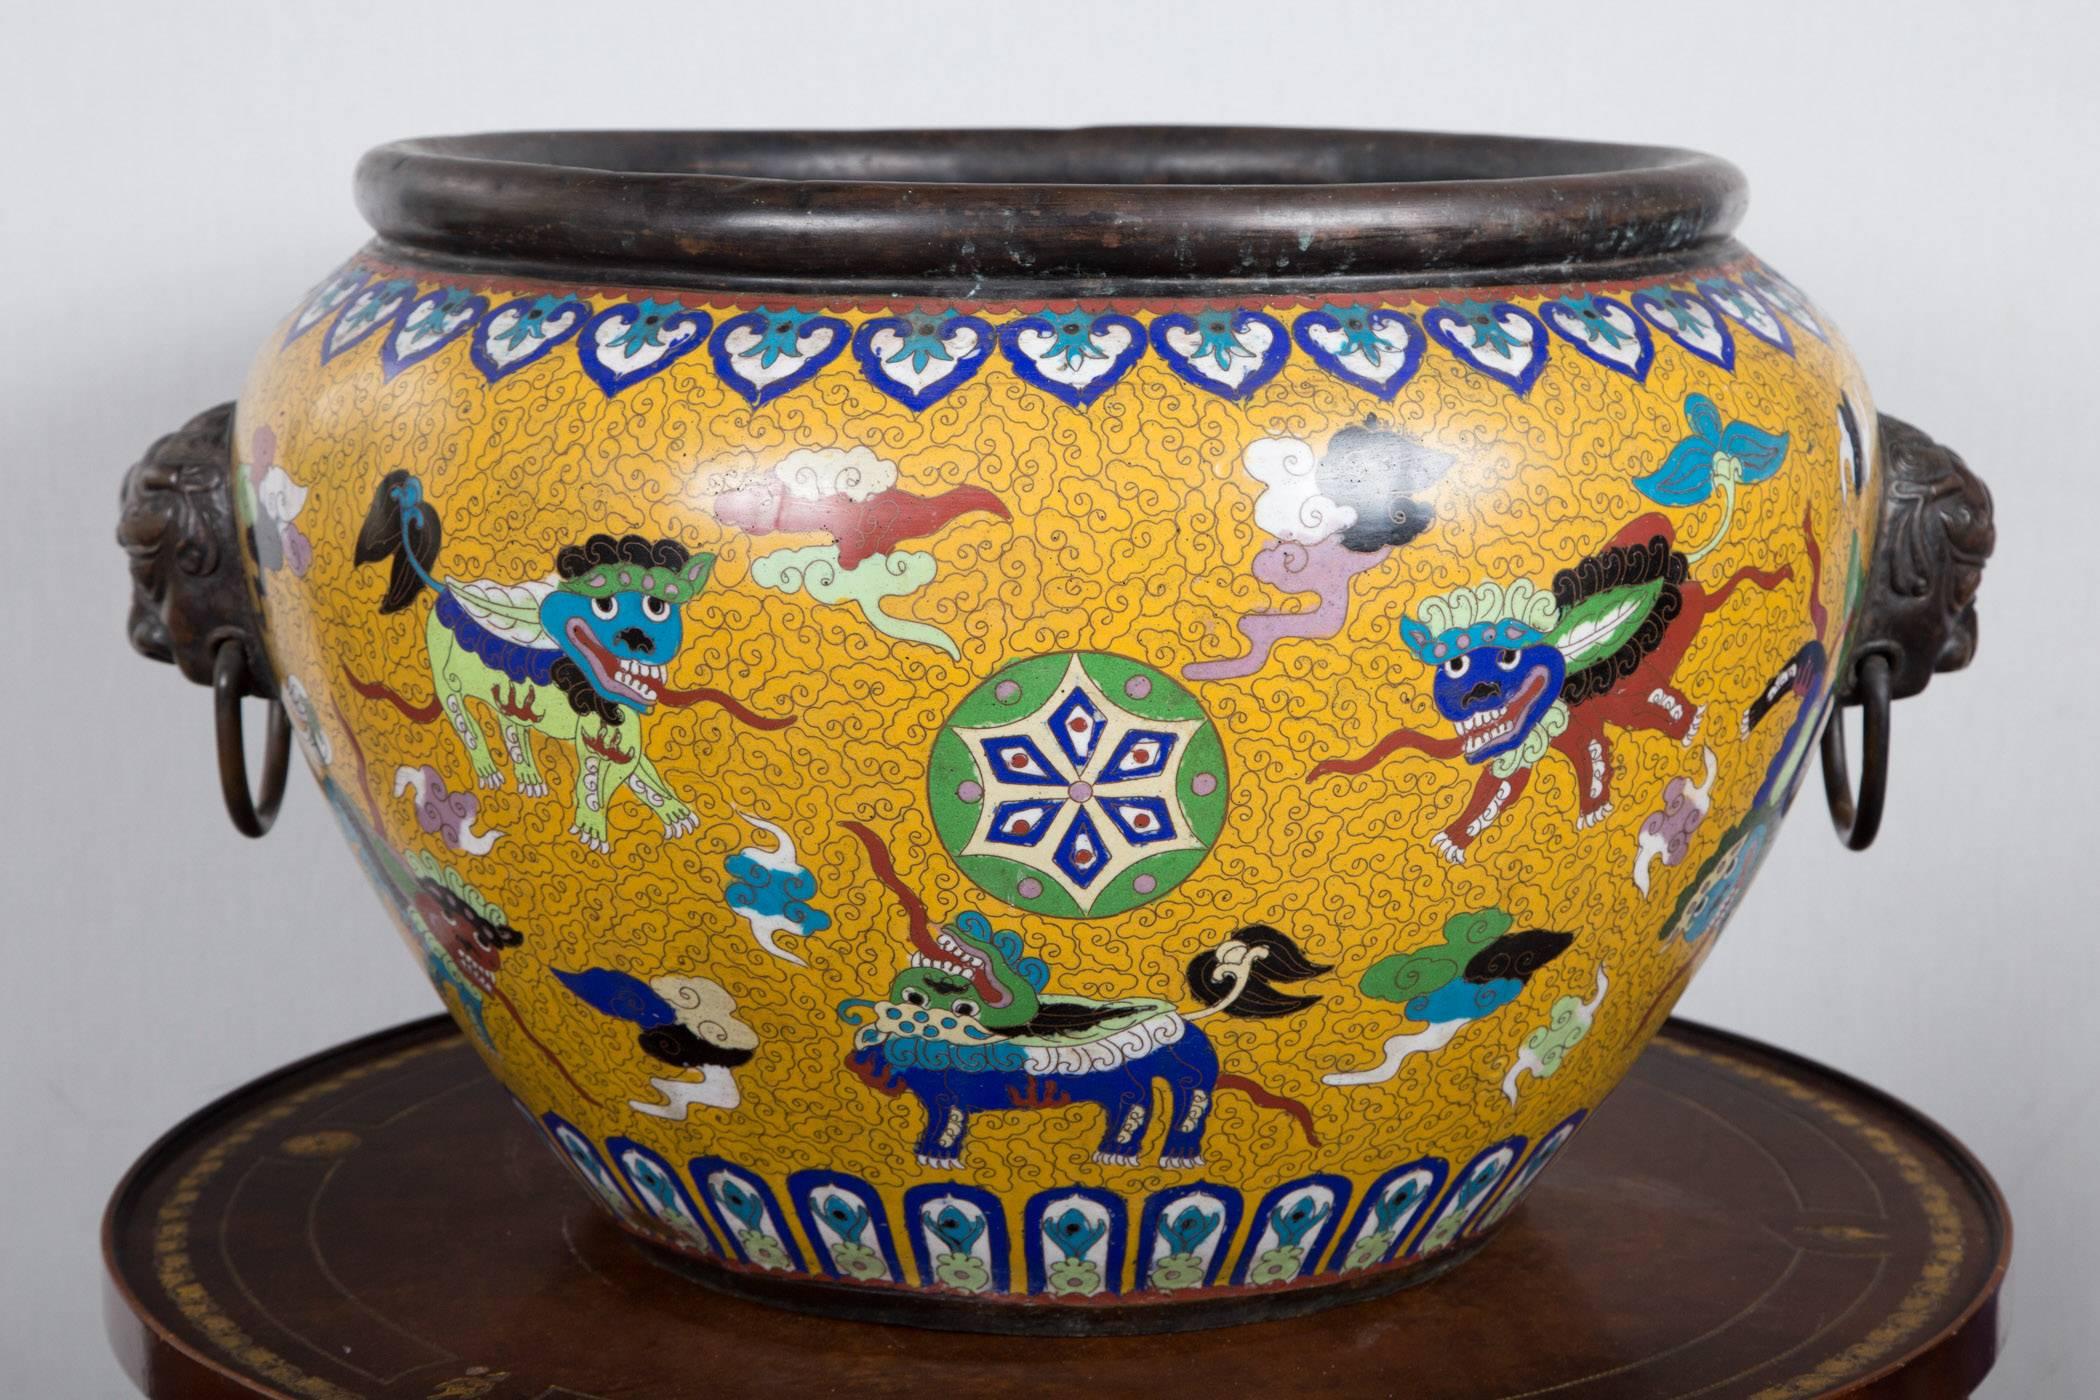 Cloisonné on brass planter in bright yellow, decorated with foo dogs, kylins, monsters and abstract forms. Brass lion heads with ring handles. Rolled brass top edge.